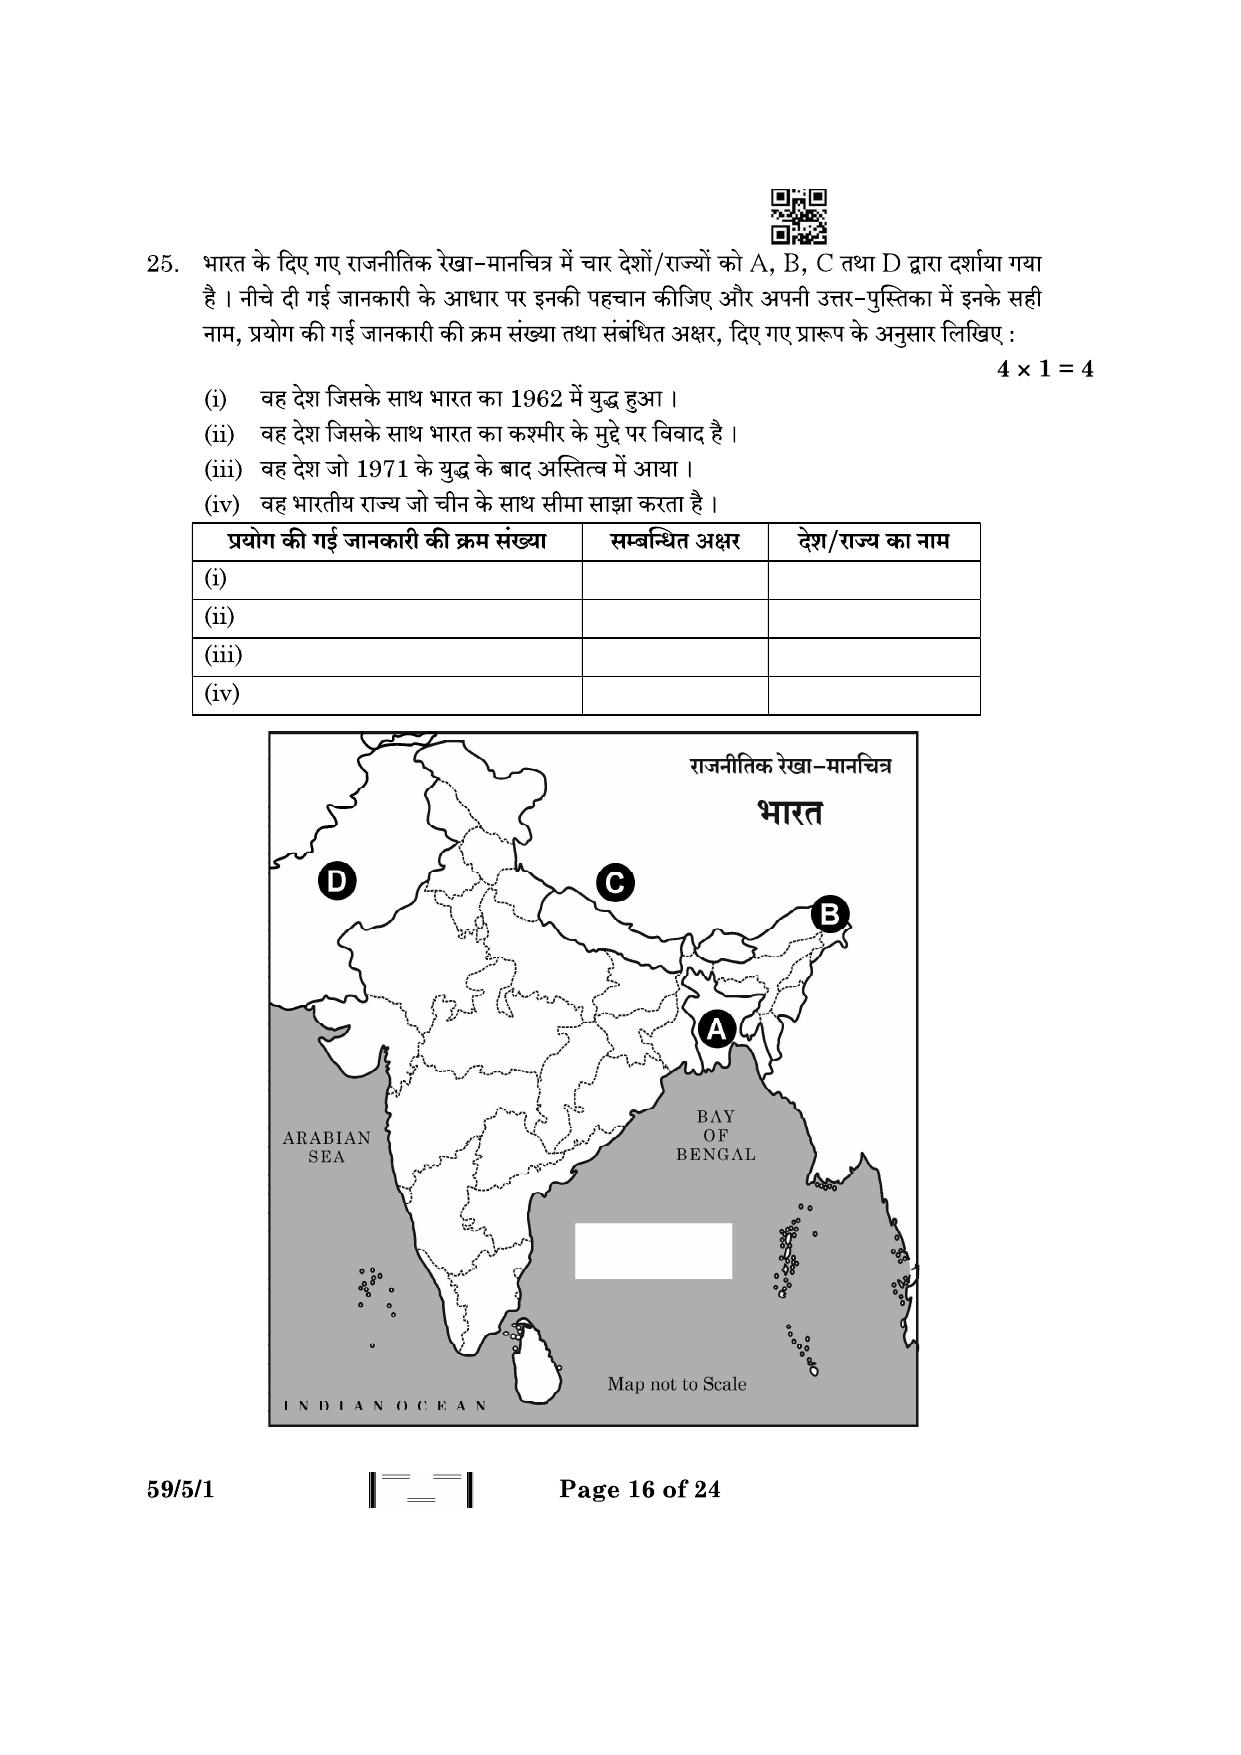 CBSE Class 12 59-5-1 Political Science 2023 Question Paper - Page 16